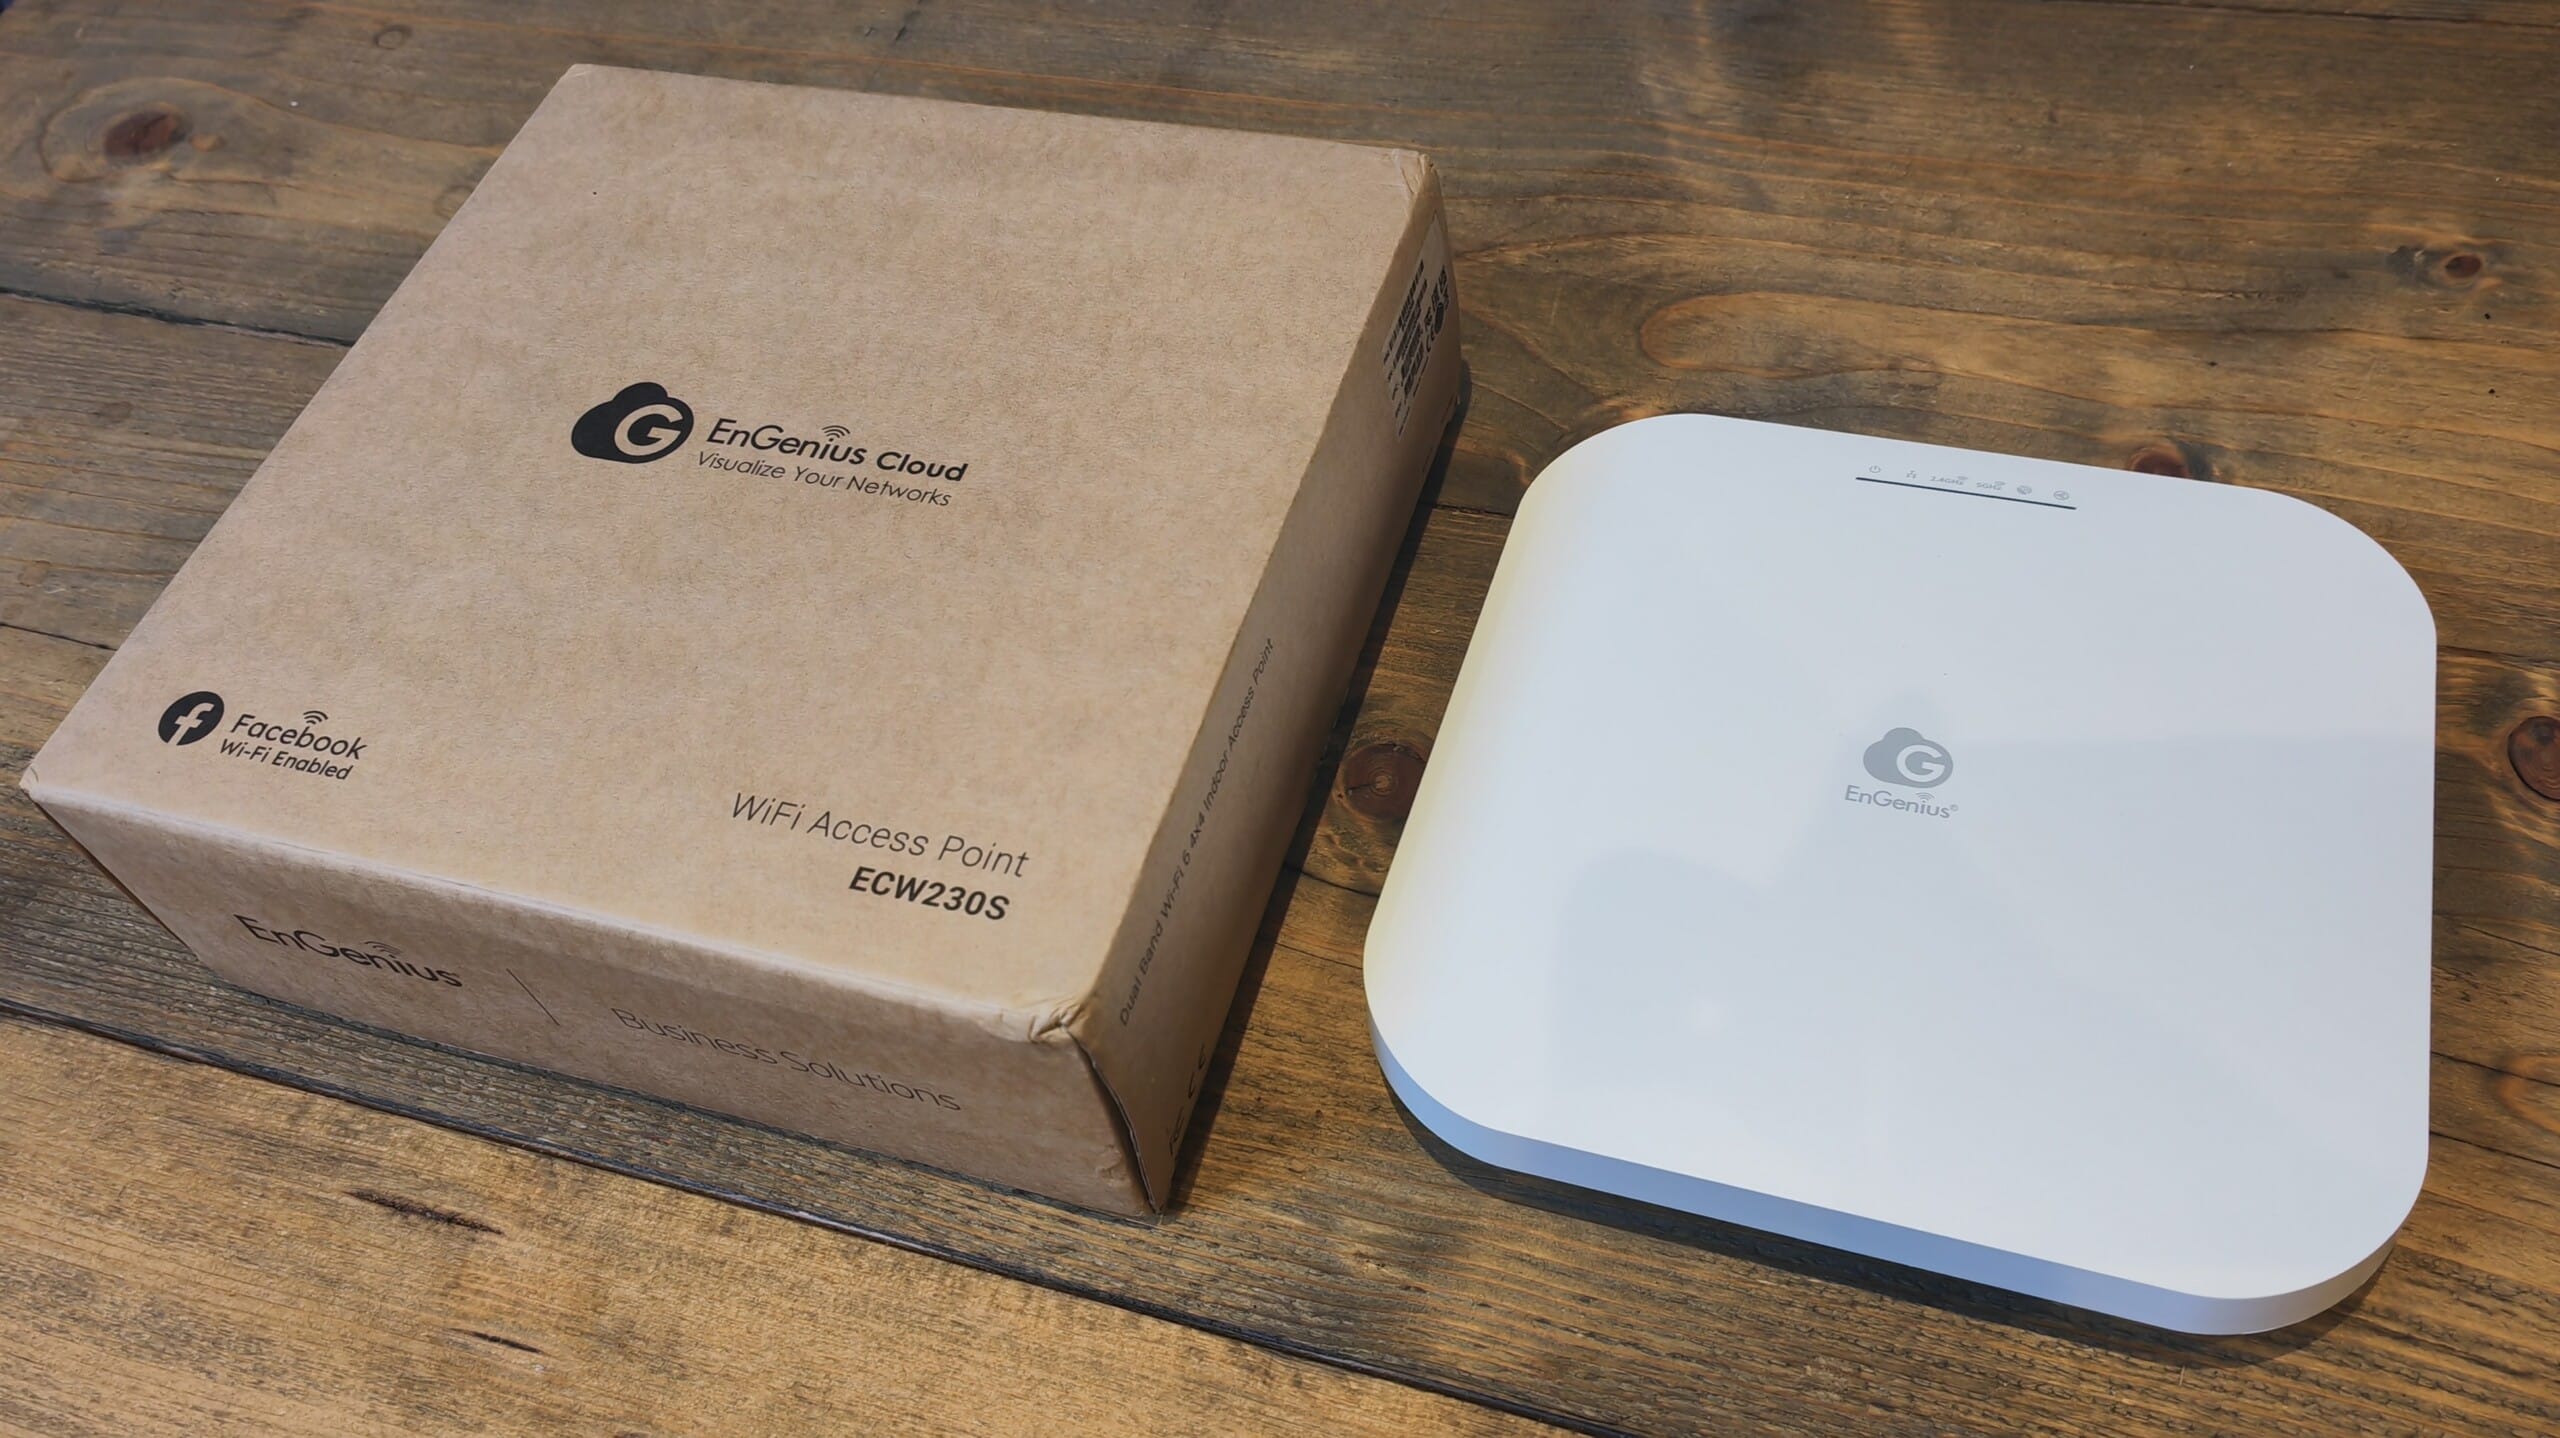 EnGenius ECW230S Review: A 4×4 Cloud Managed Indoor Wireless Access Point with WIPS radio and Zero DFS radio detection